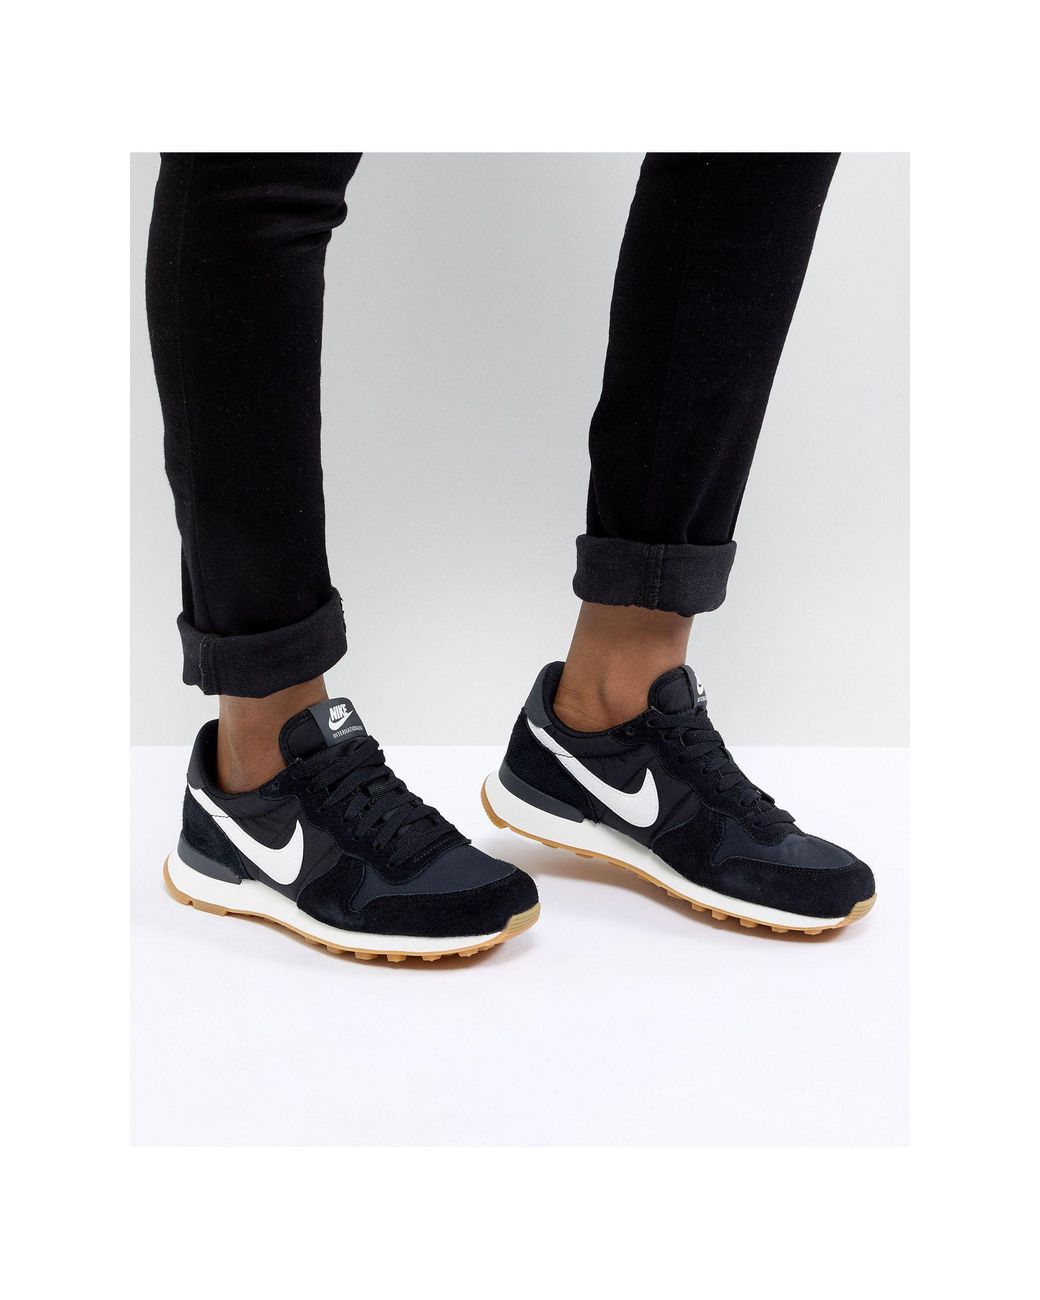 Nike Internationalist Competition Running Shoes in Black | Lyst